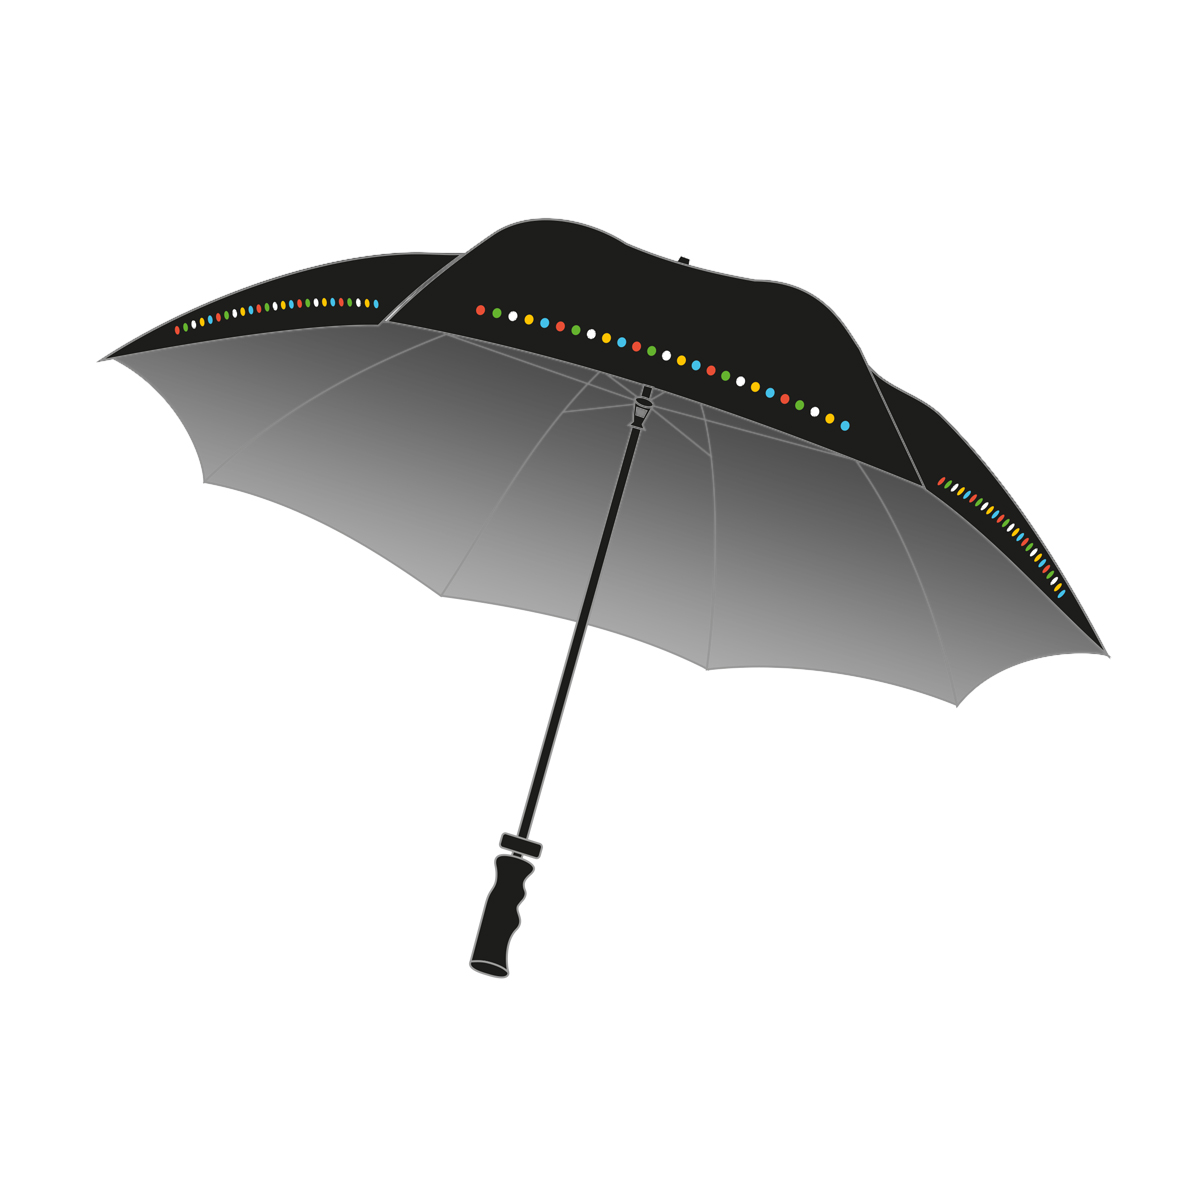 Umbrella - out of stock